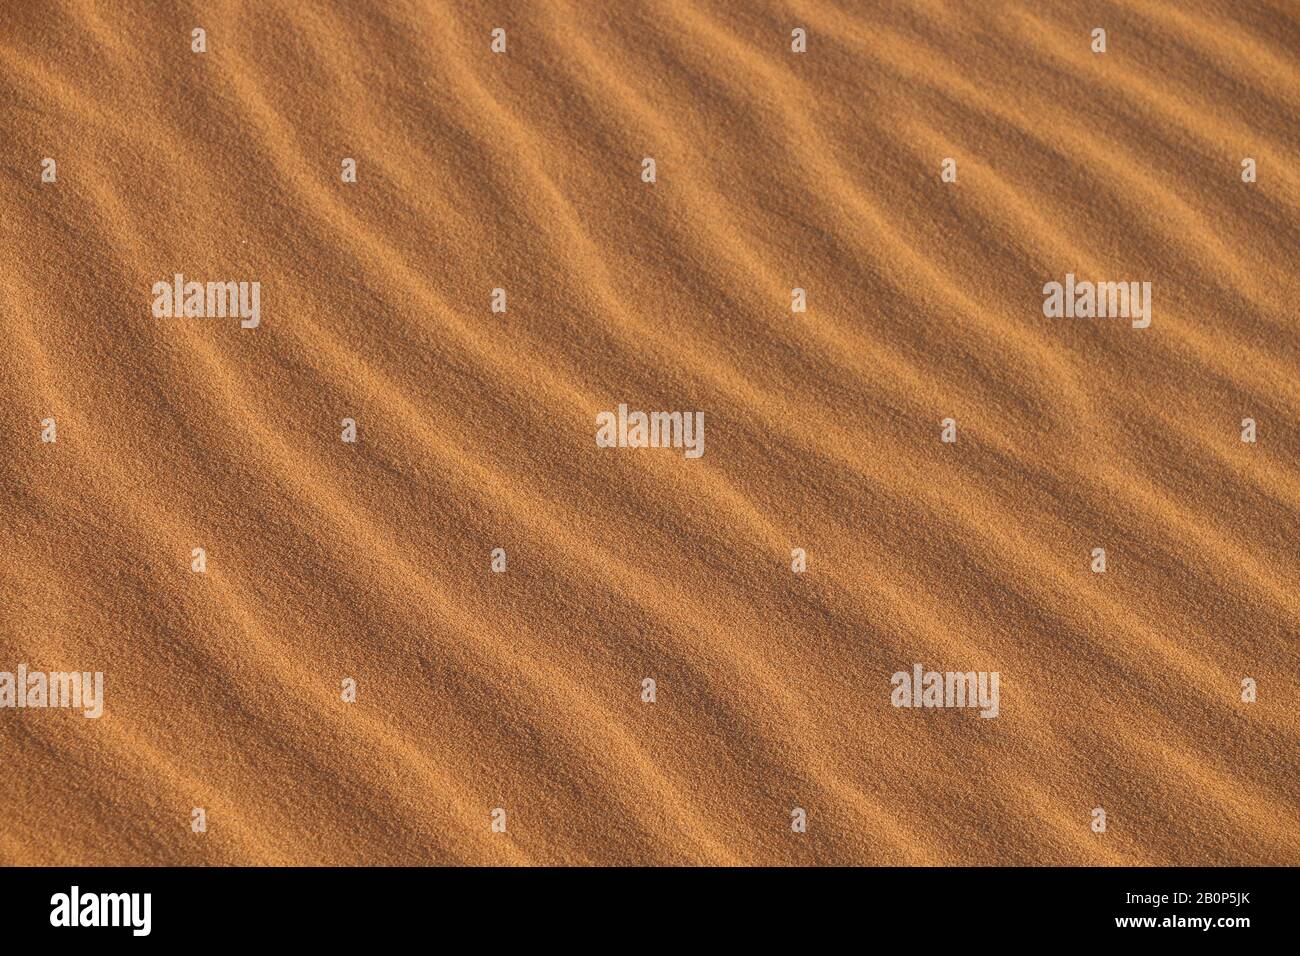 Sand Texture Background Of Desert Sand Dunes Beautiful Structures Of Sandy Dunes Sand With Wave From Wind In Desert Close Up Stock Photo Alamy